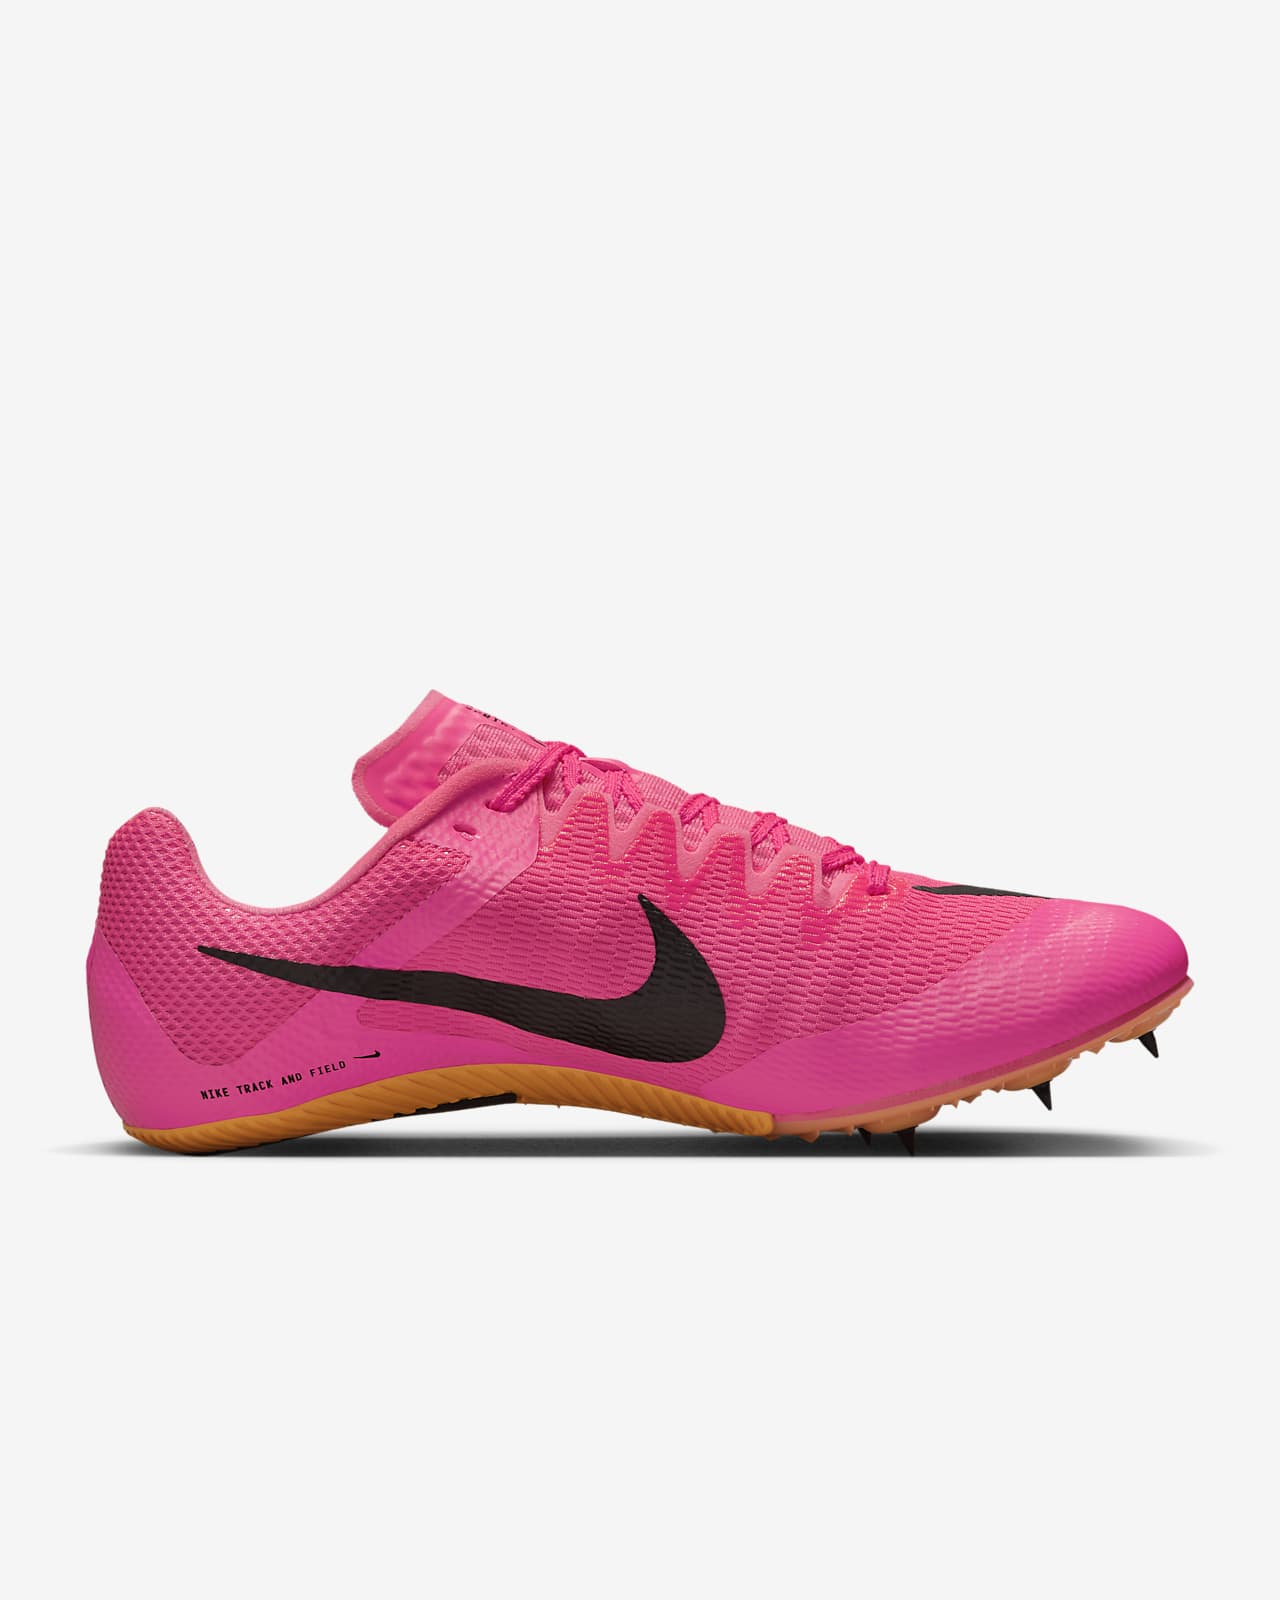 Nike Zoom Rival Athletics Sprinting Spikes. Nike PT